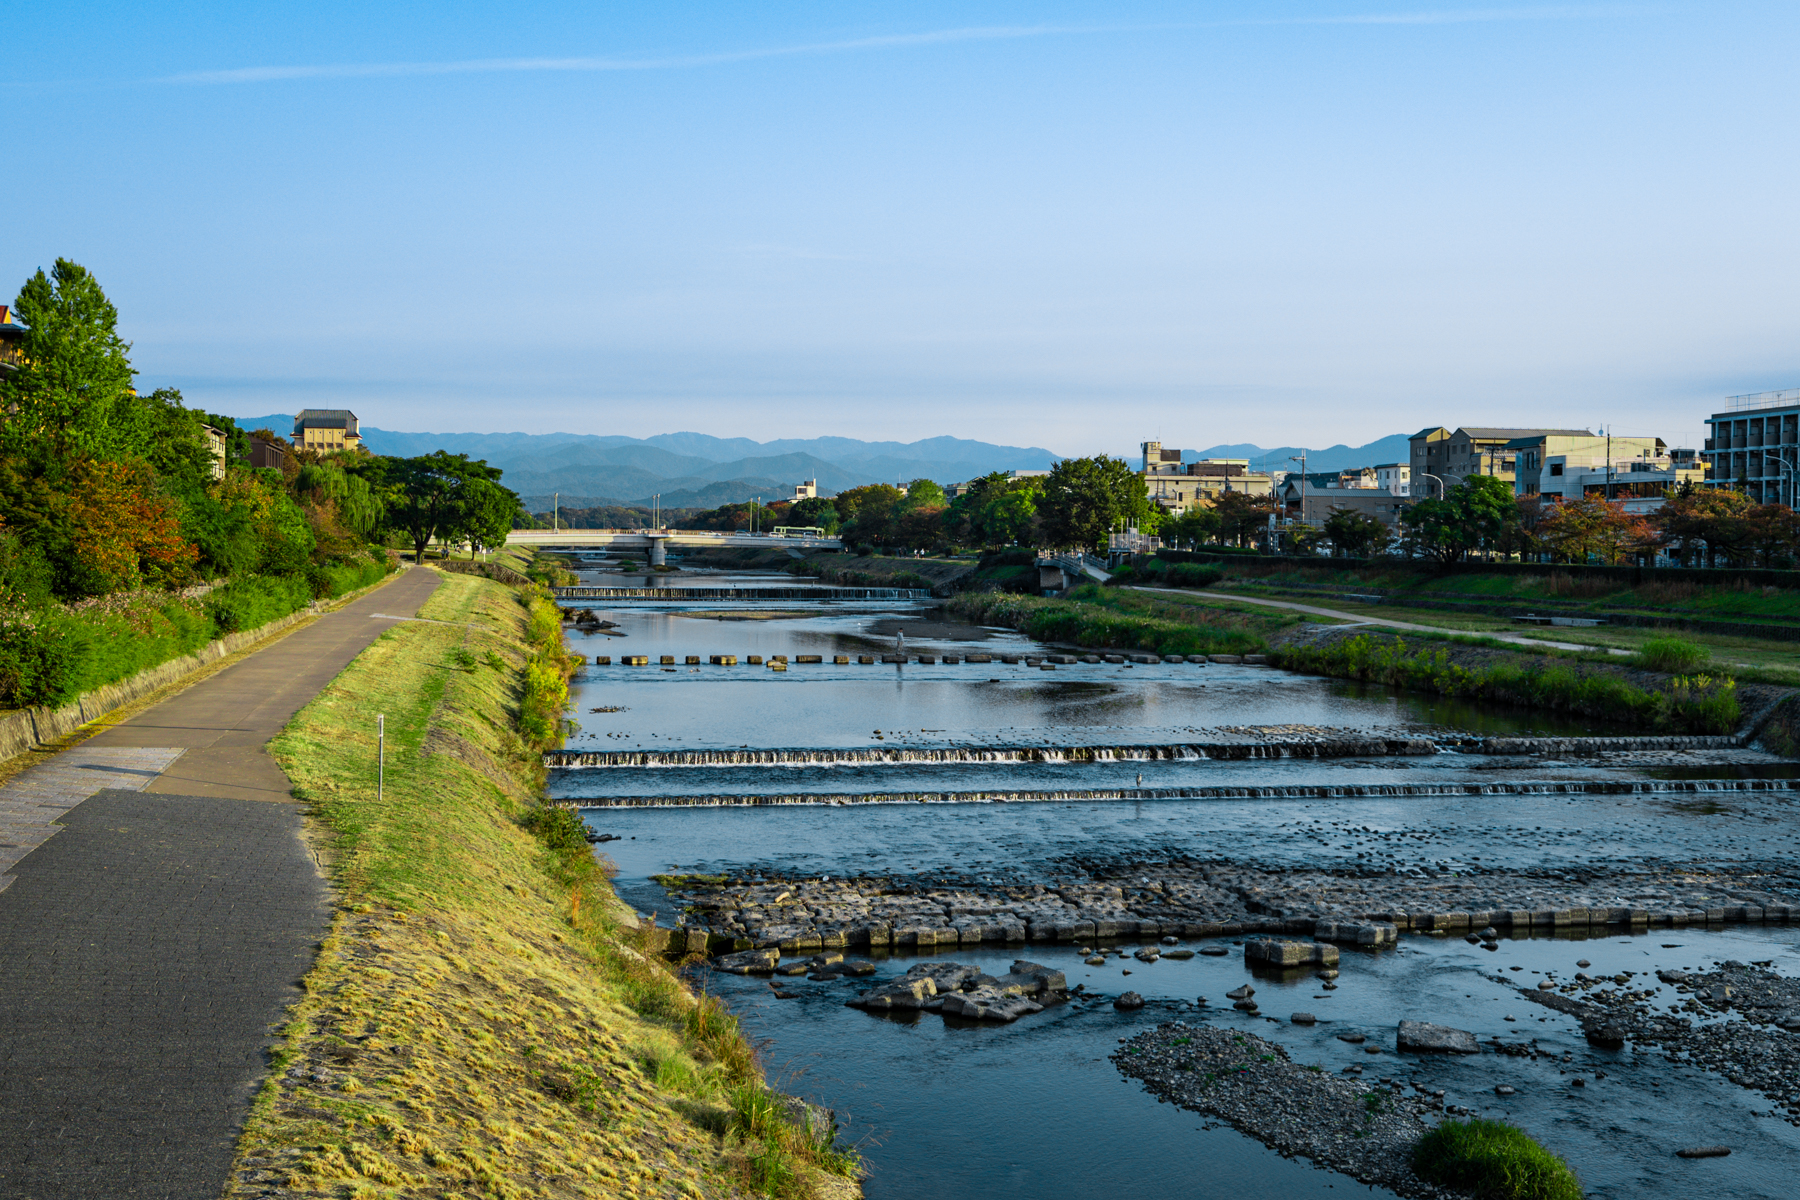 Kamogawa River with stone steps and mountains in the background and blue sky.